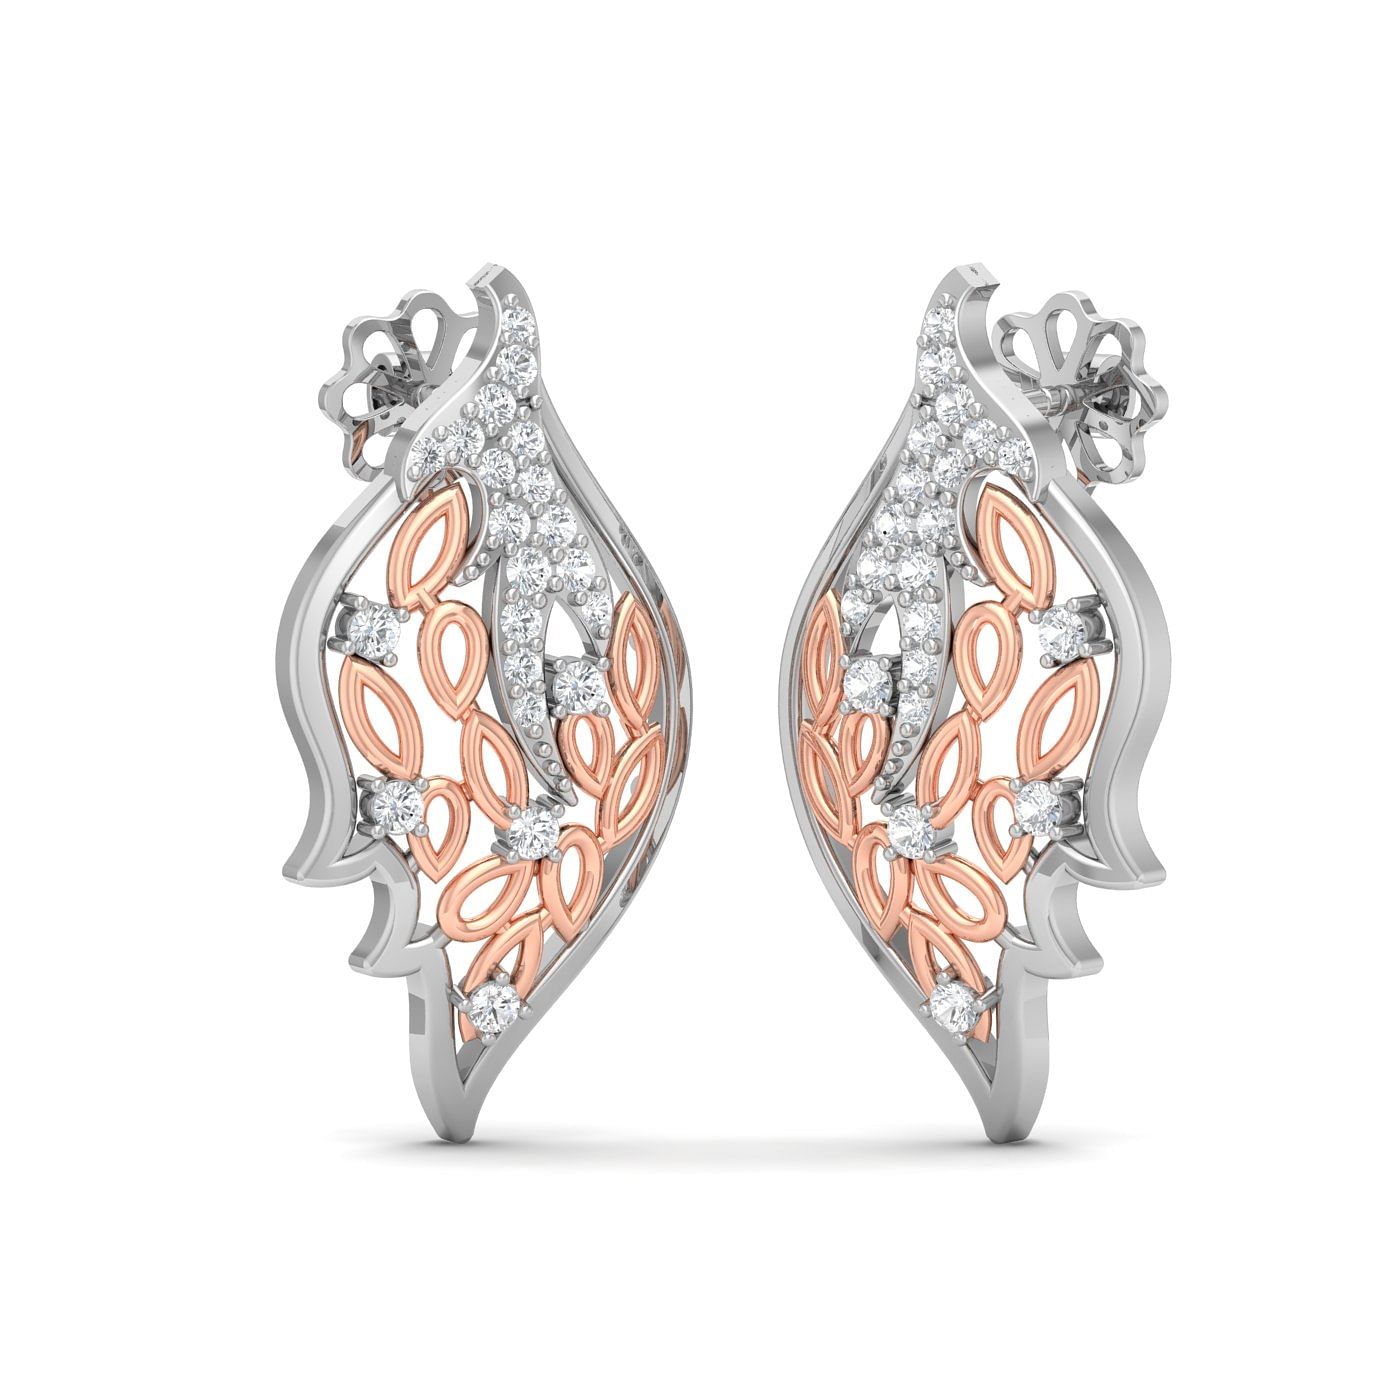 Leafy Design White Gold Diamond Earring For Daily Wear